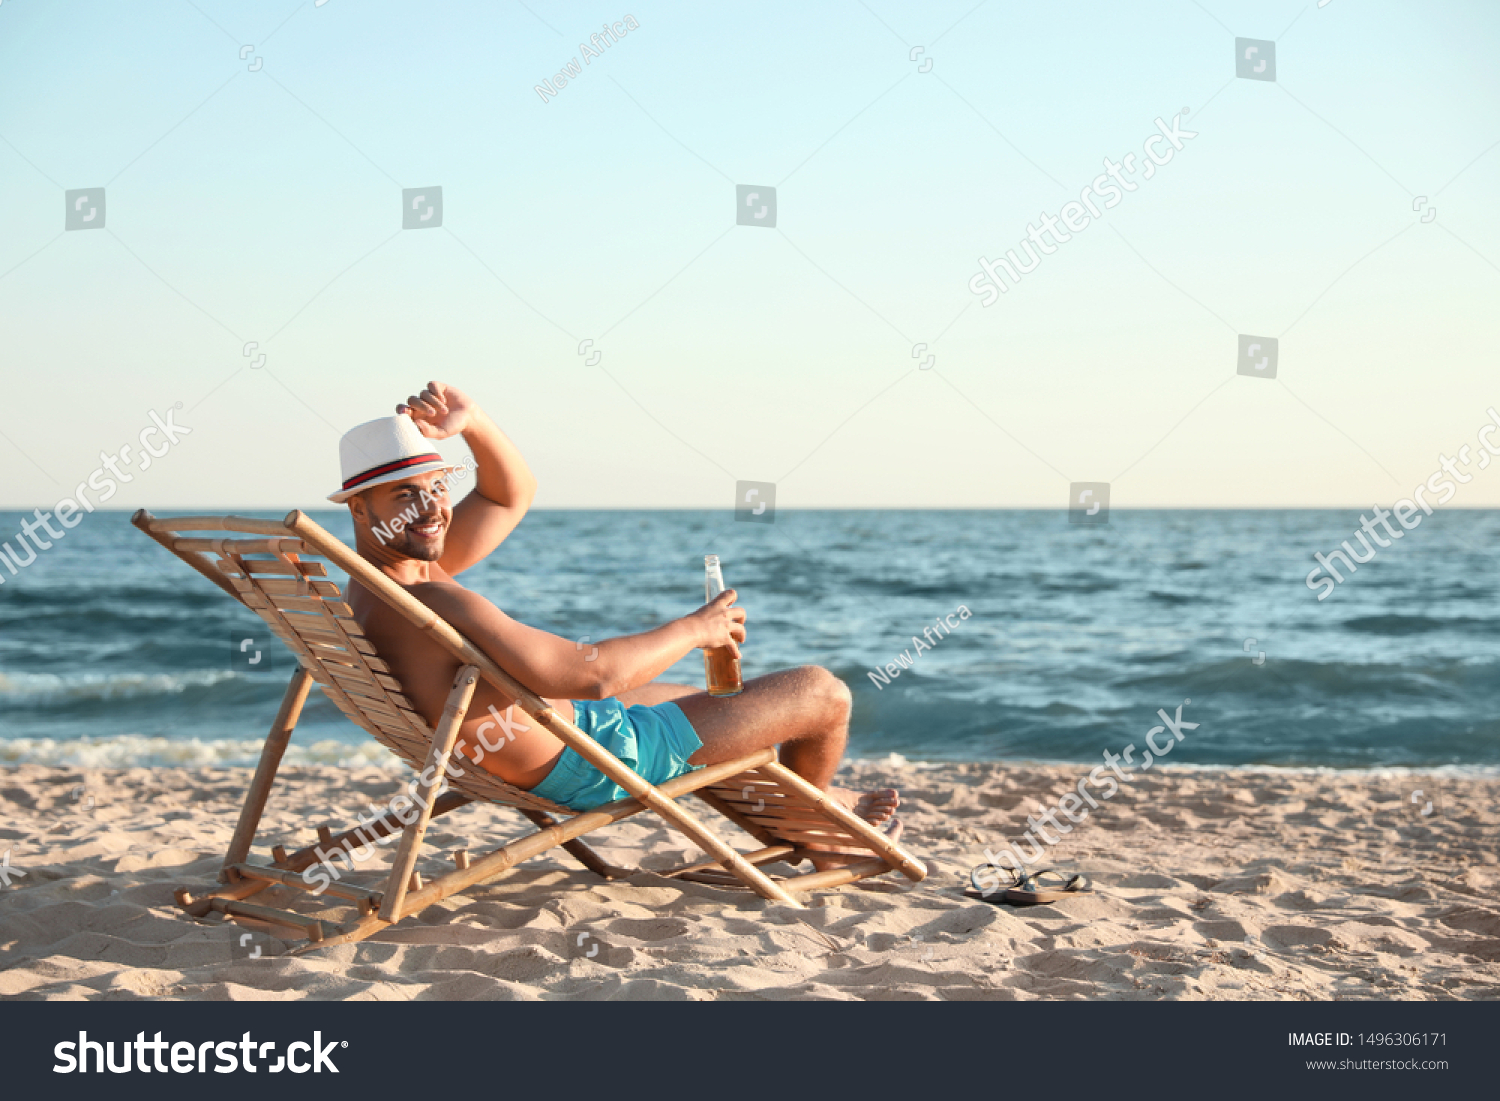 Young man relaxing in deck chair on beach near sea #1496306171